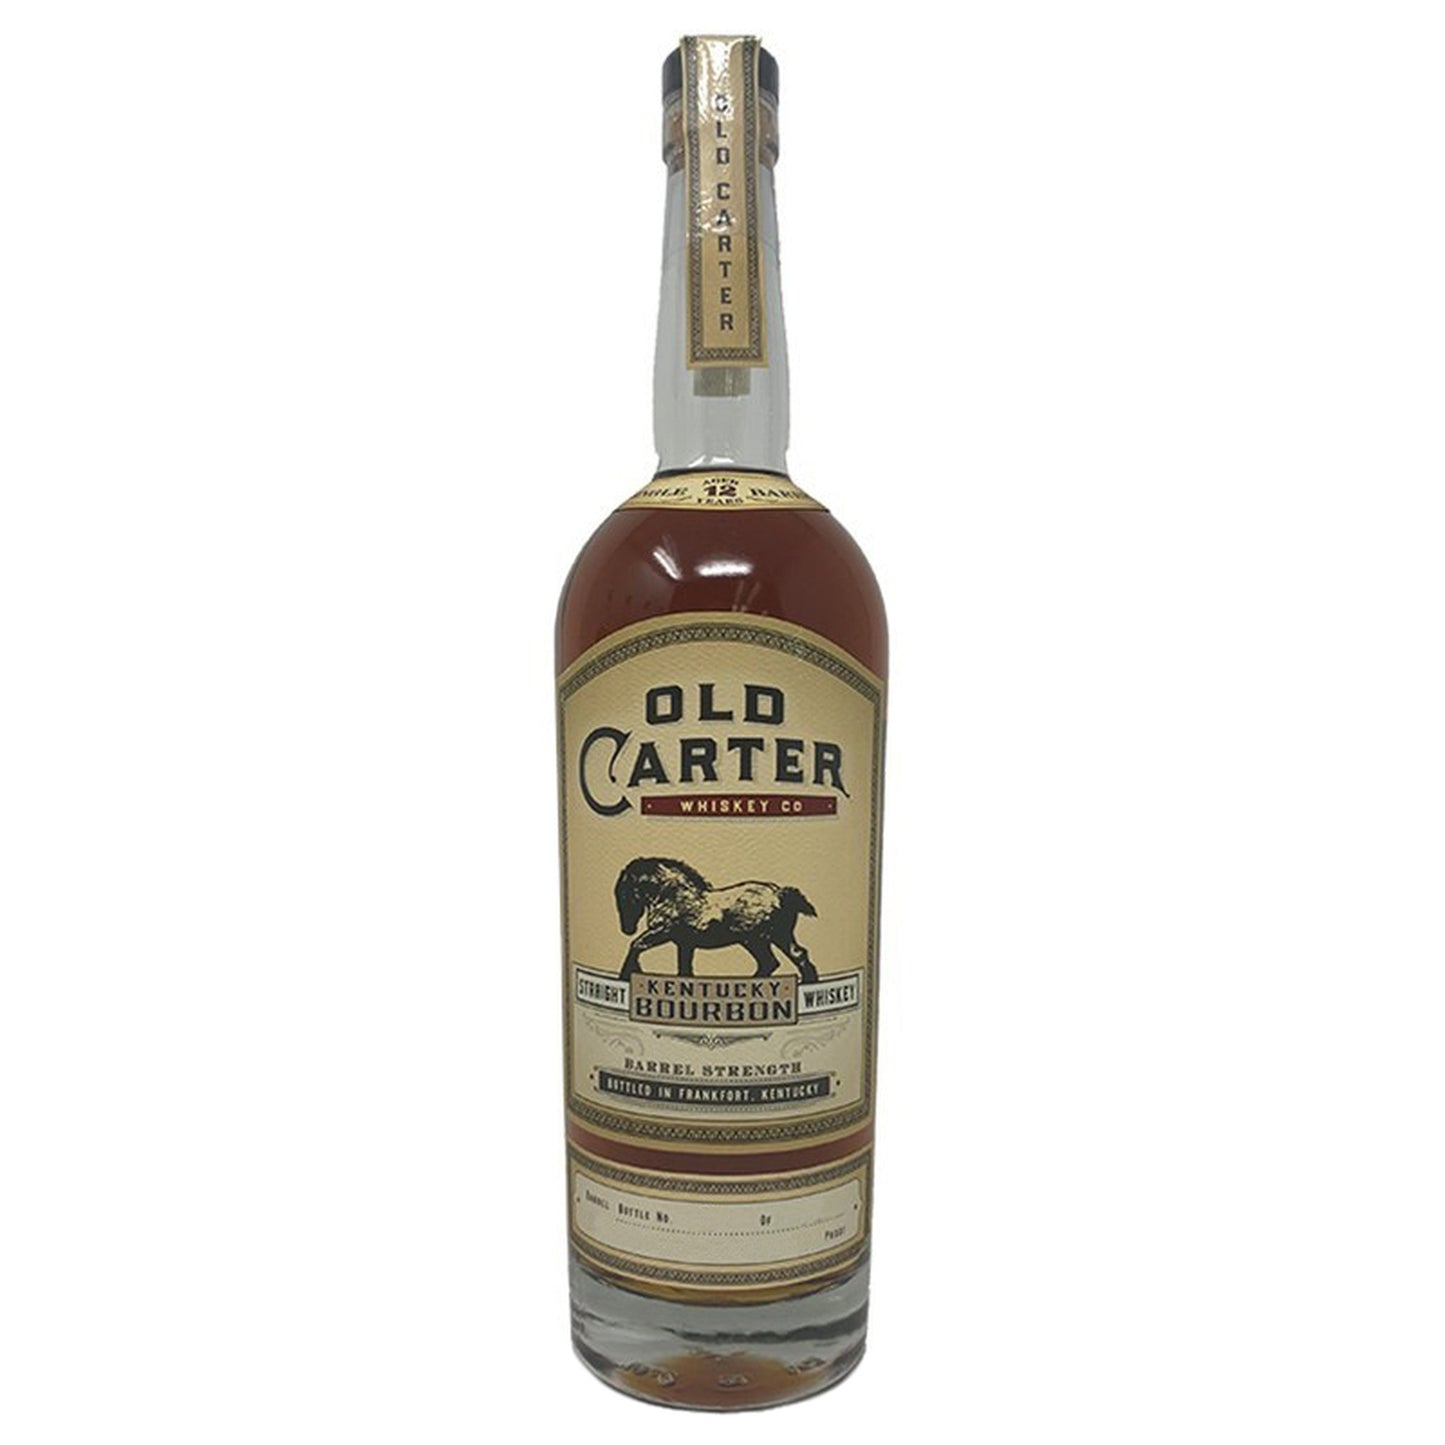 Old Carter Straight Kentucky Bourbon Whiskey Small Barrel Aged 13 Years Barrel 53 117.4 Proof 750ml